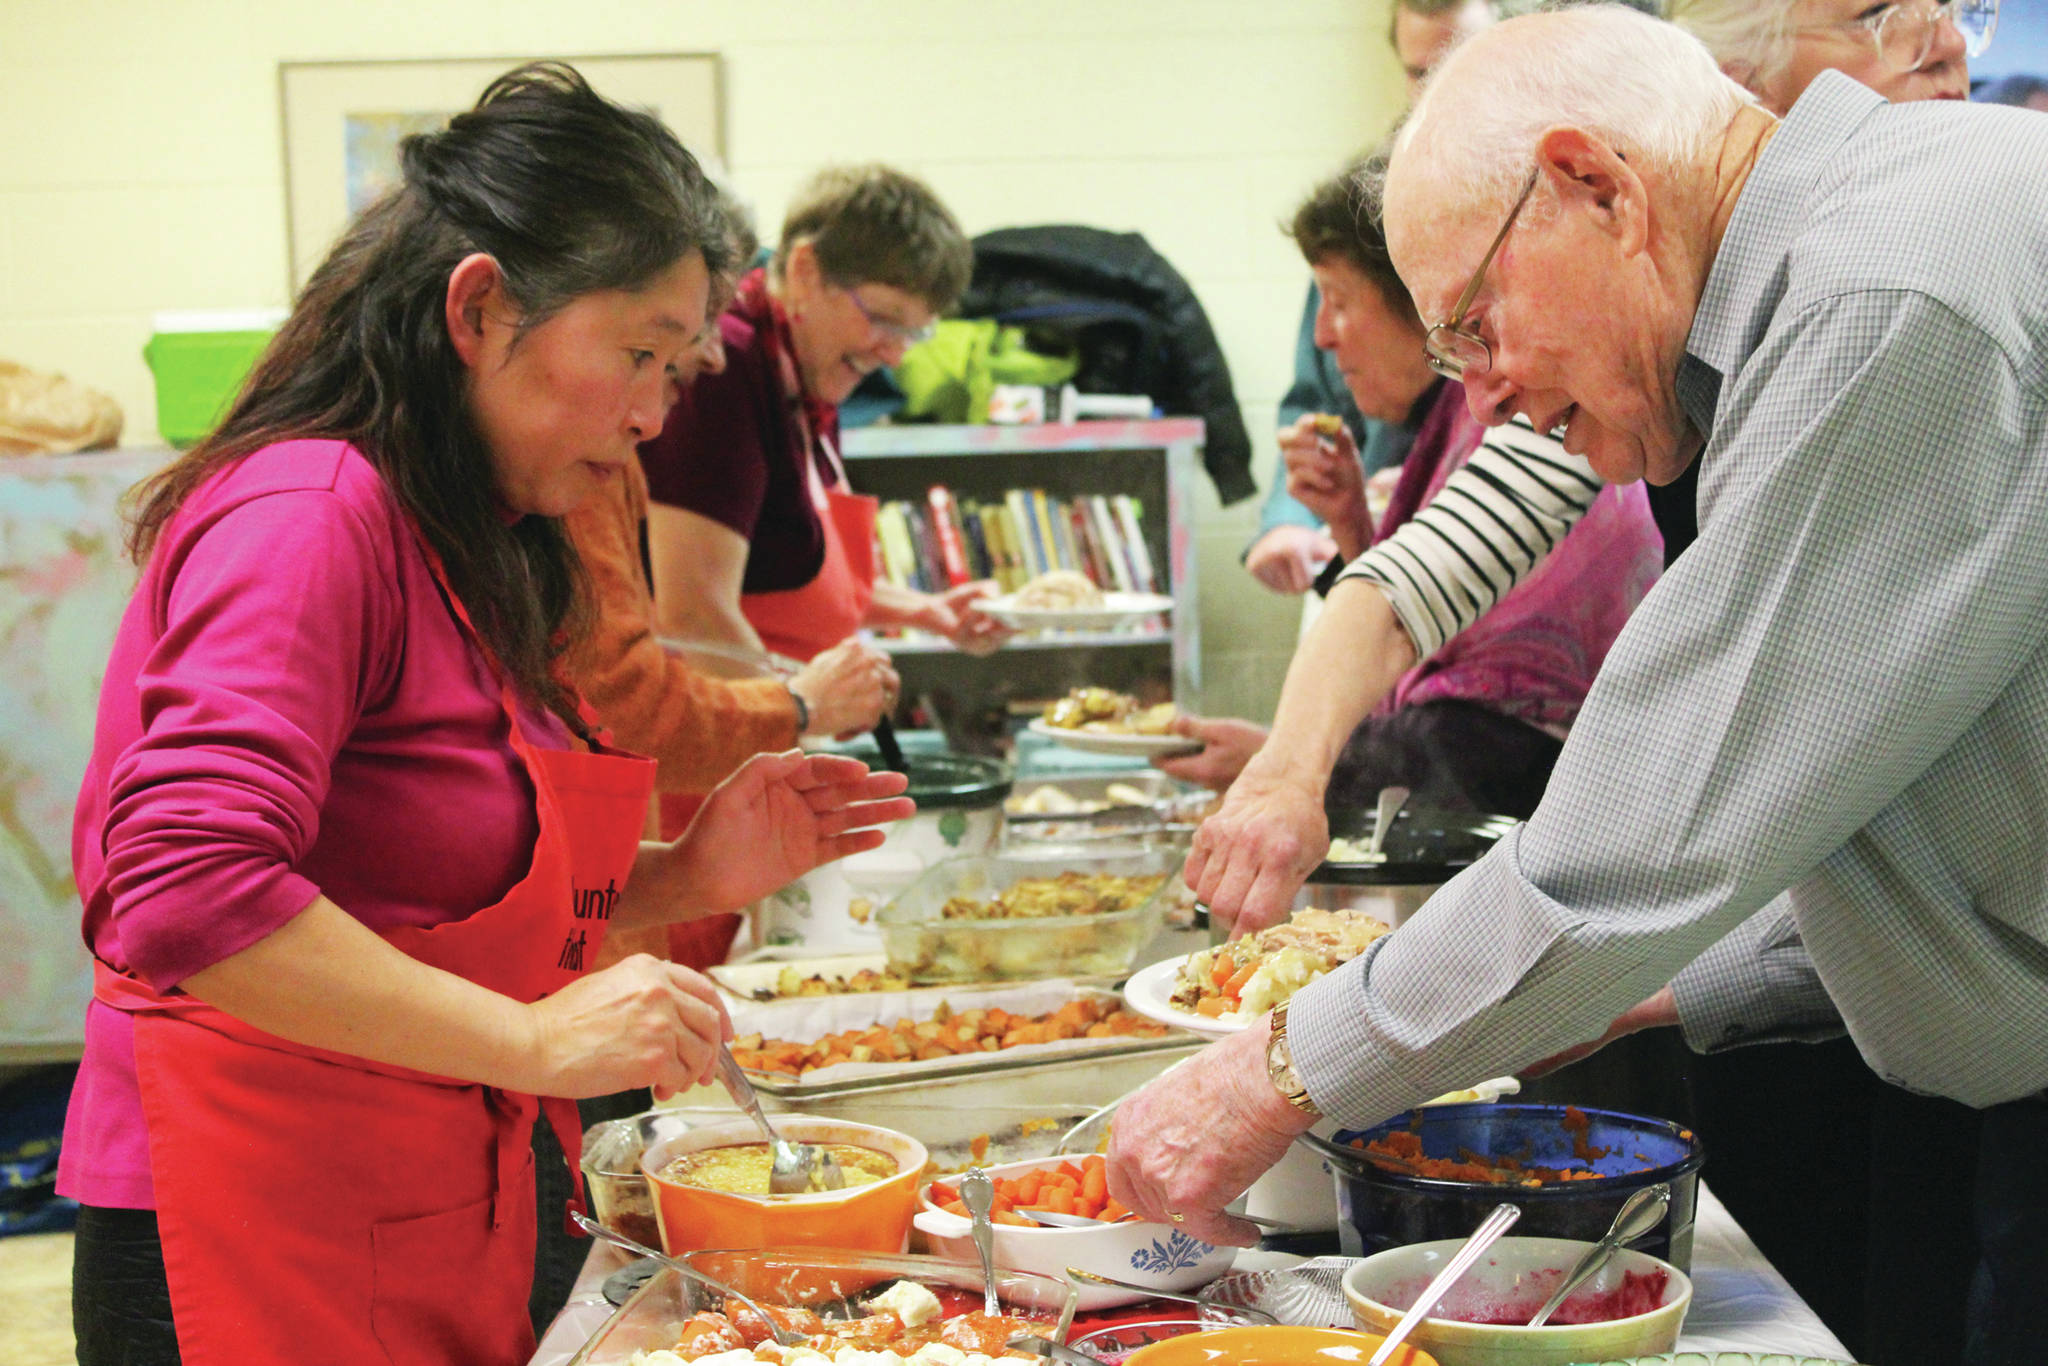 Volunteers serve a Thanksgiving meal to community members Thursday, Nov. 28, 2019 at Homer United Methodist Church in Homer, Alaska. (Photo by Megan Pacer/Homer News)